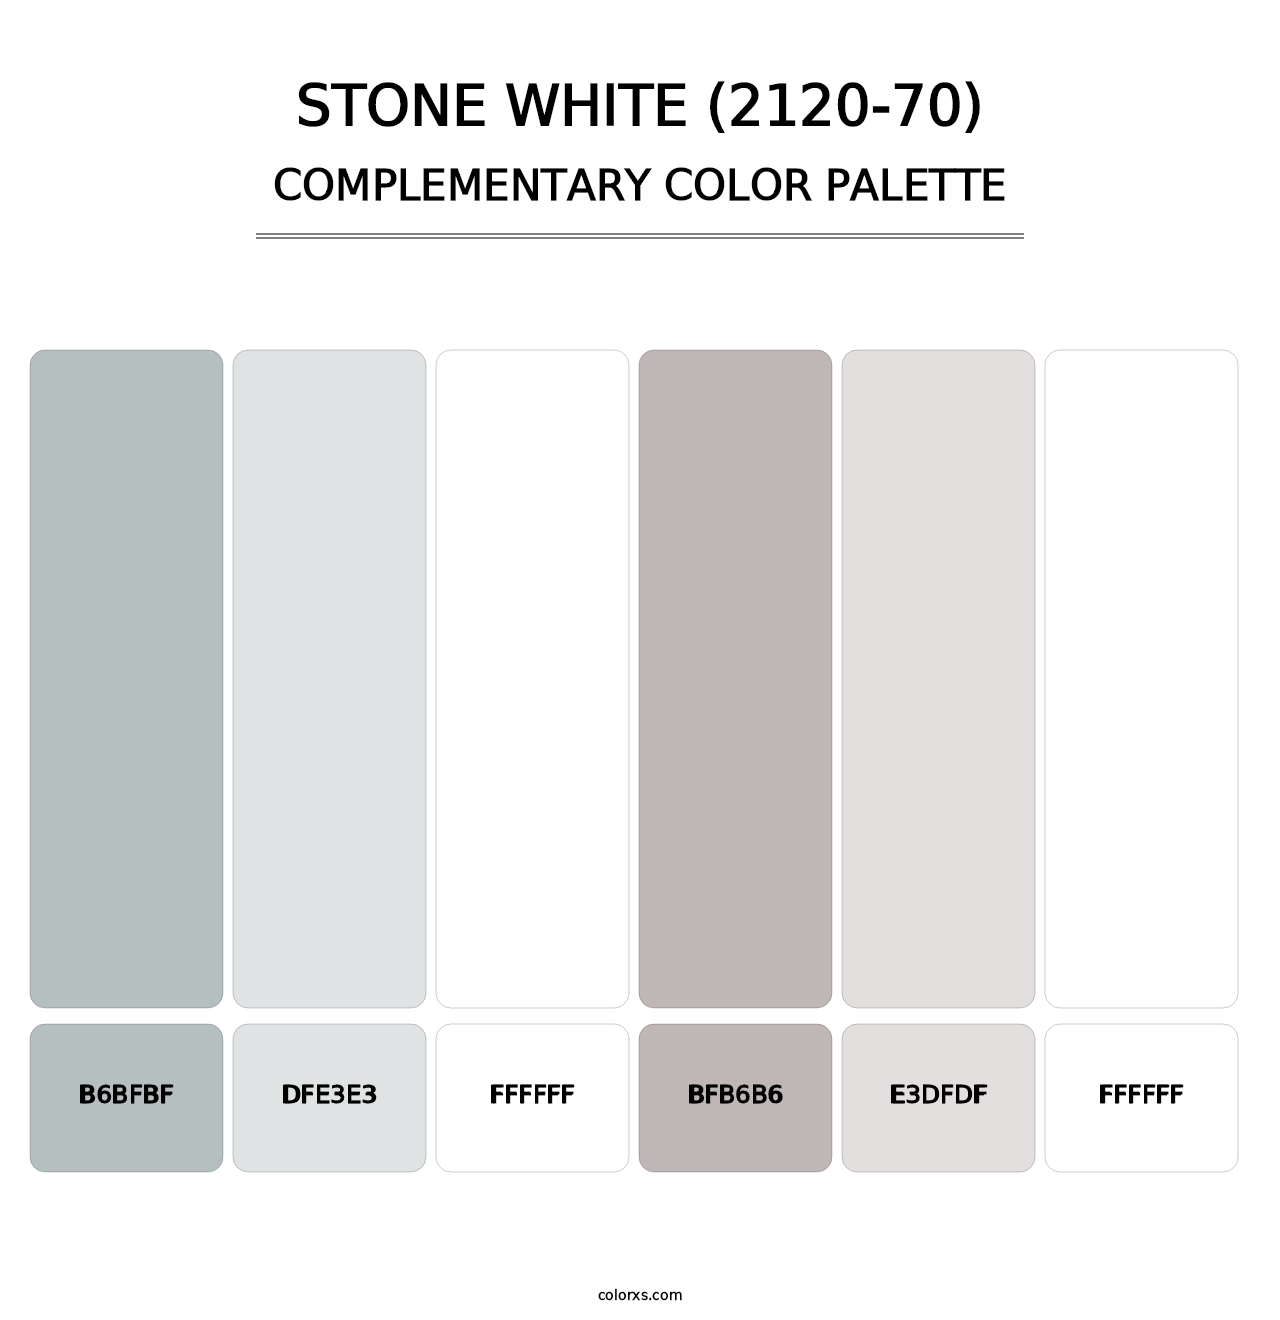 Stone White (2120-70) - Complementary Color Palette